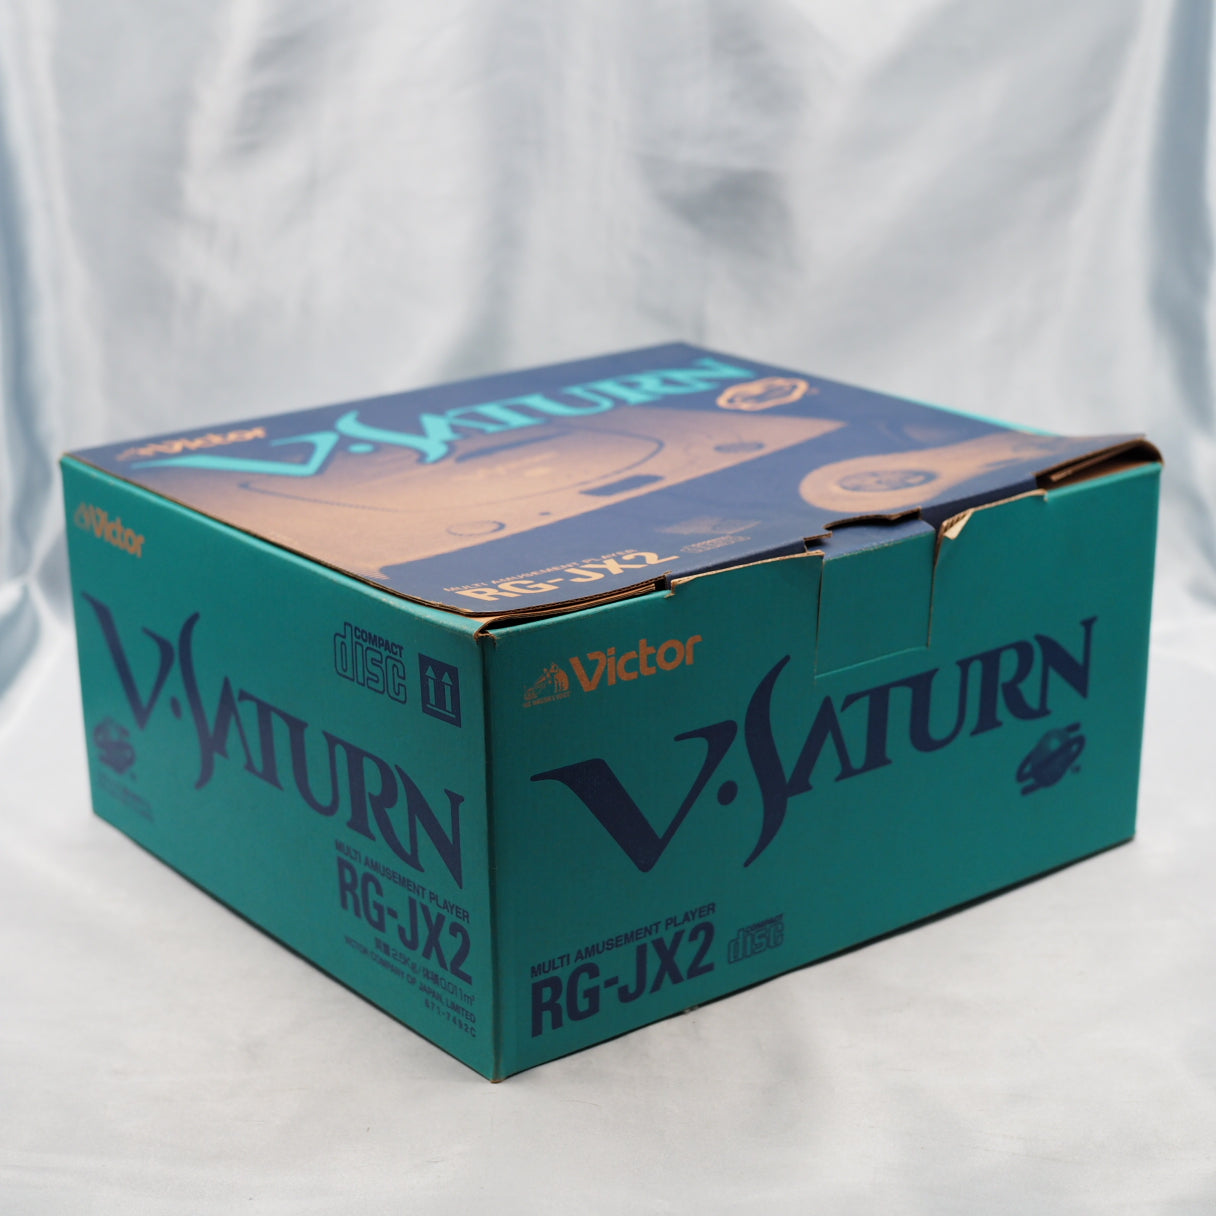 VICTOR V SATURN Console RG-JX2 Boxed [Serial number match]